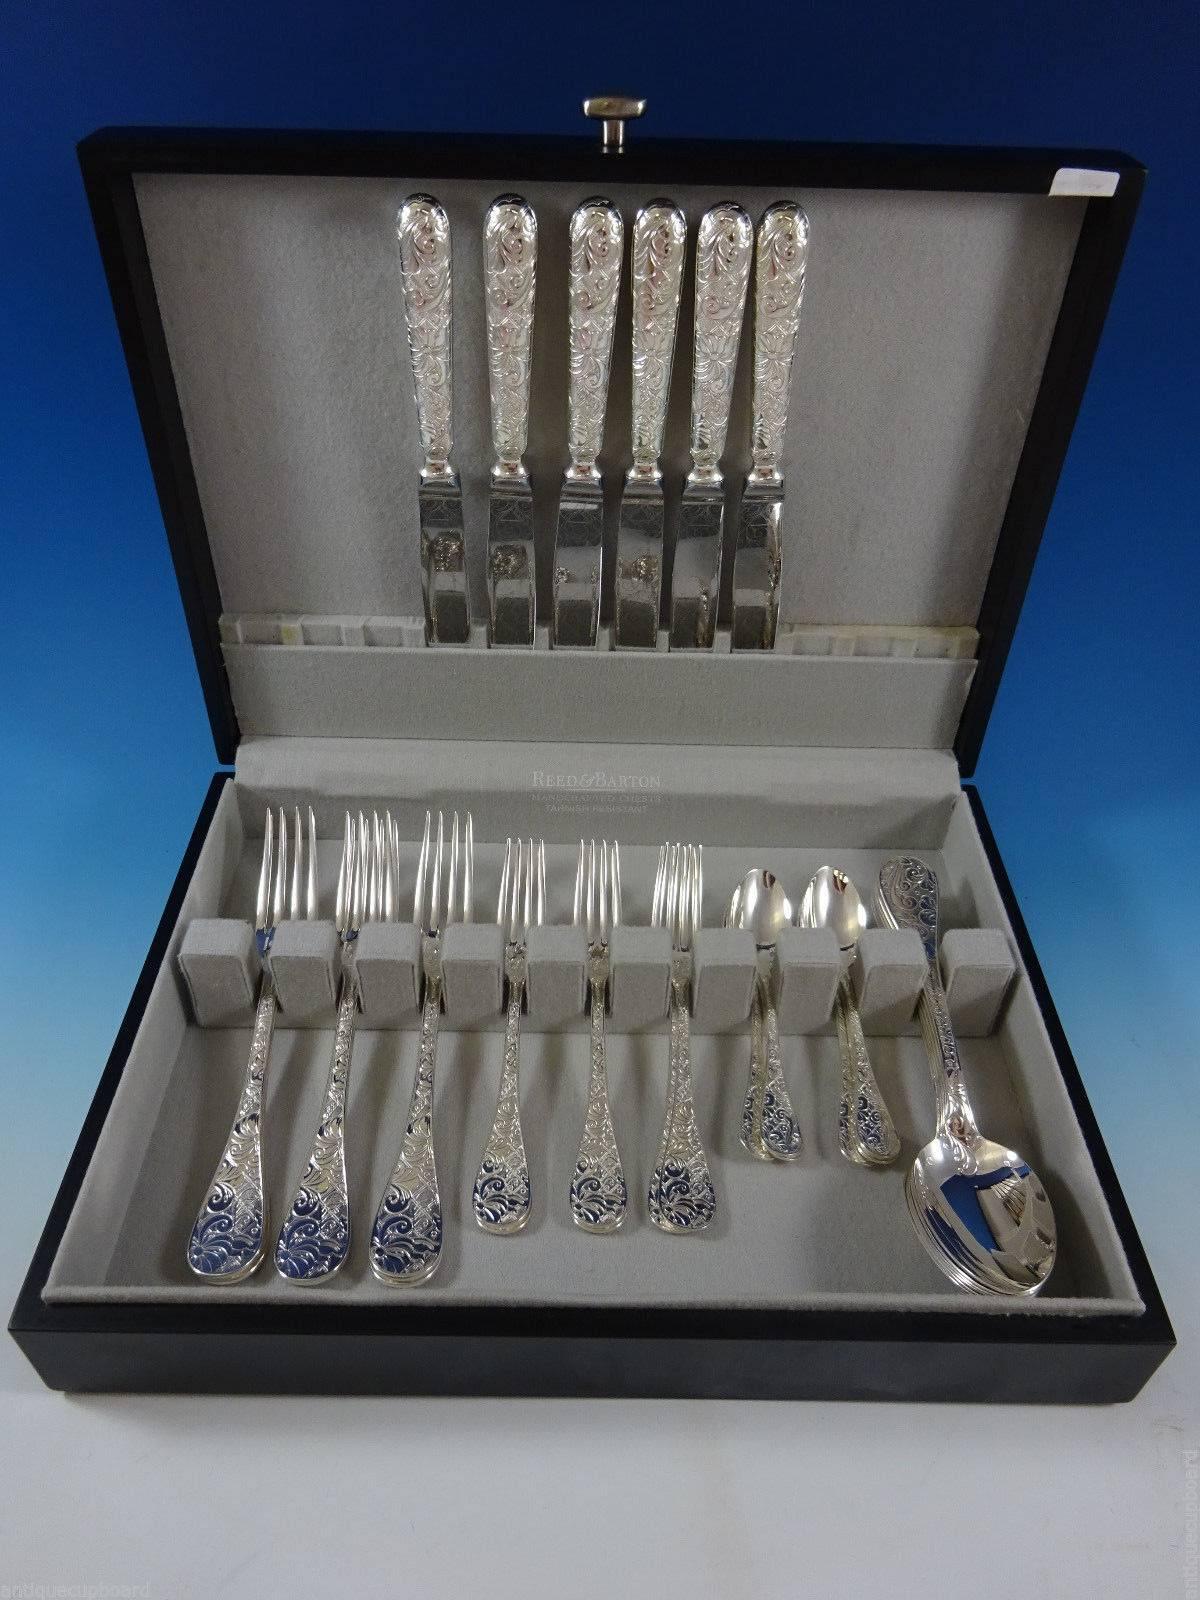 Christofle French silver flatware has been crafted by master artisans, circa 1830.

The revolutionary style and character of Christofle dinnerware comes from collaborations with groundbreaking architects, designers and artists from around the